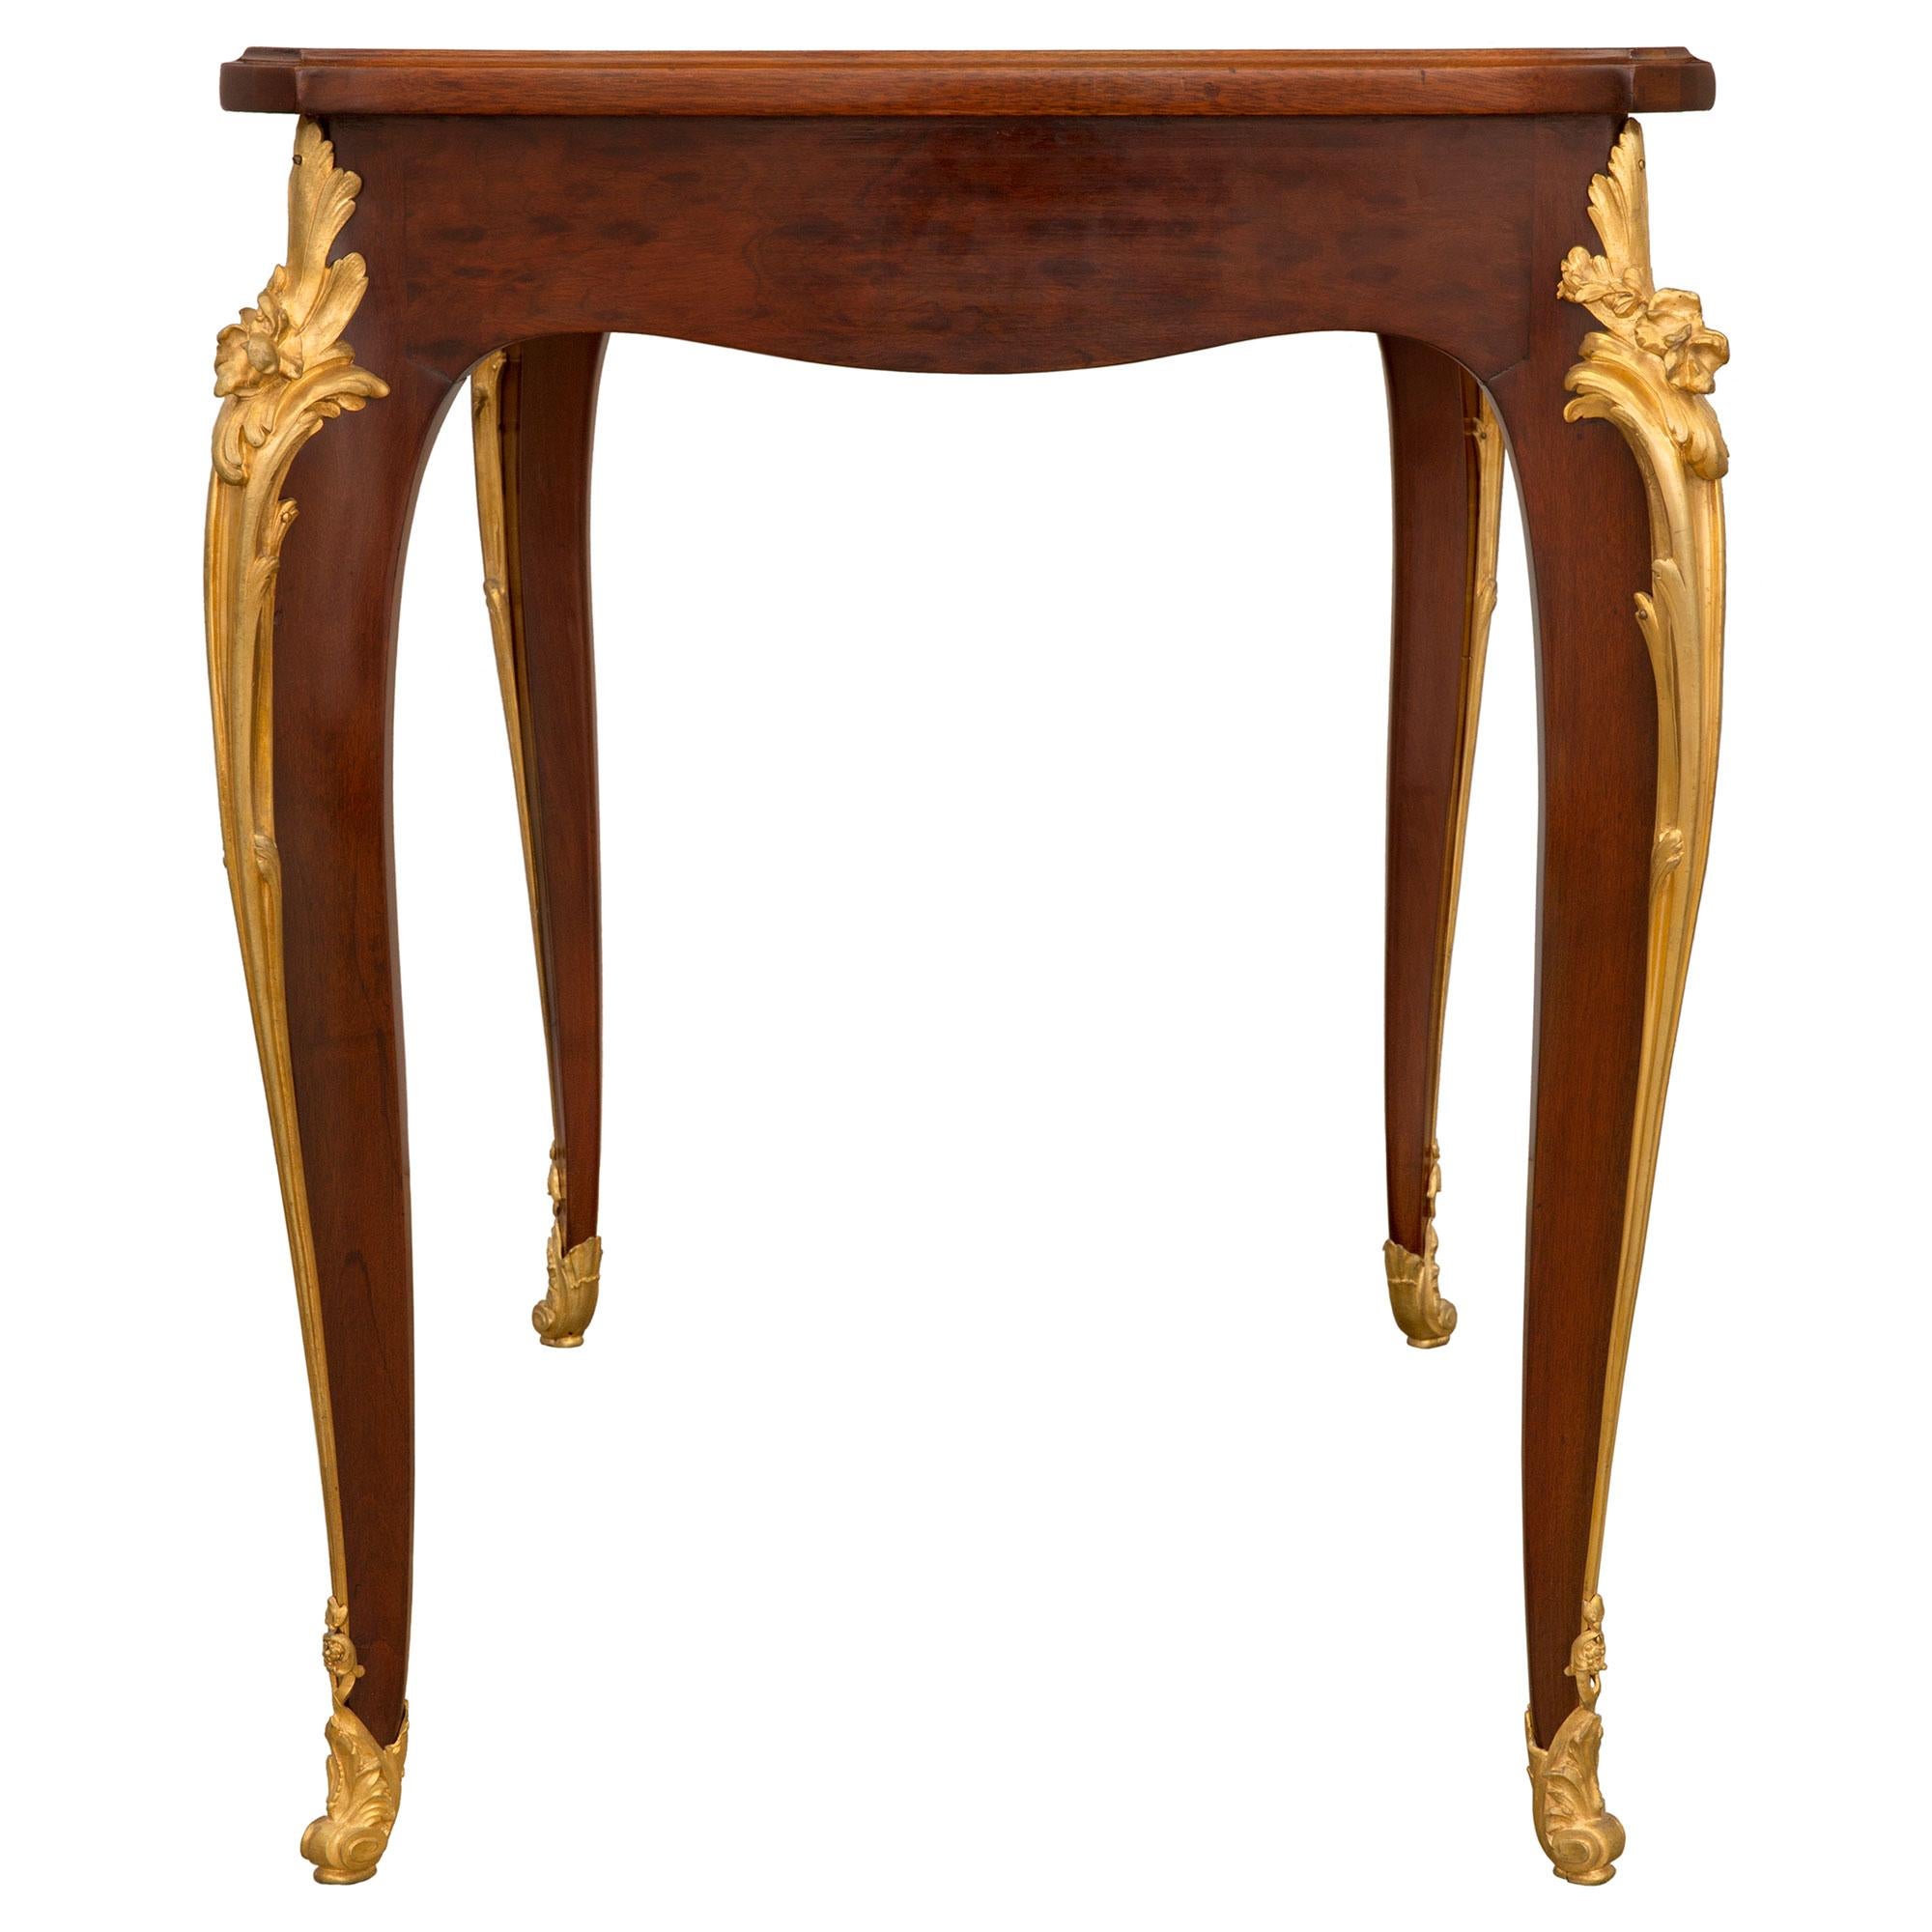 French 19th Century Louis XV Style Mahogany and Ormolu Center Table/Desk For Sale 2